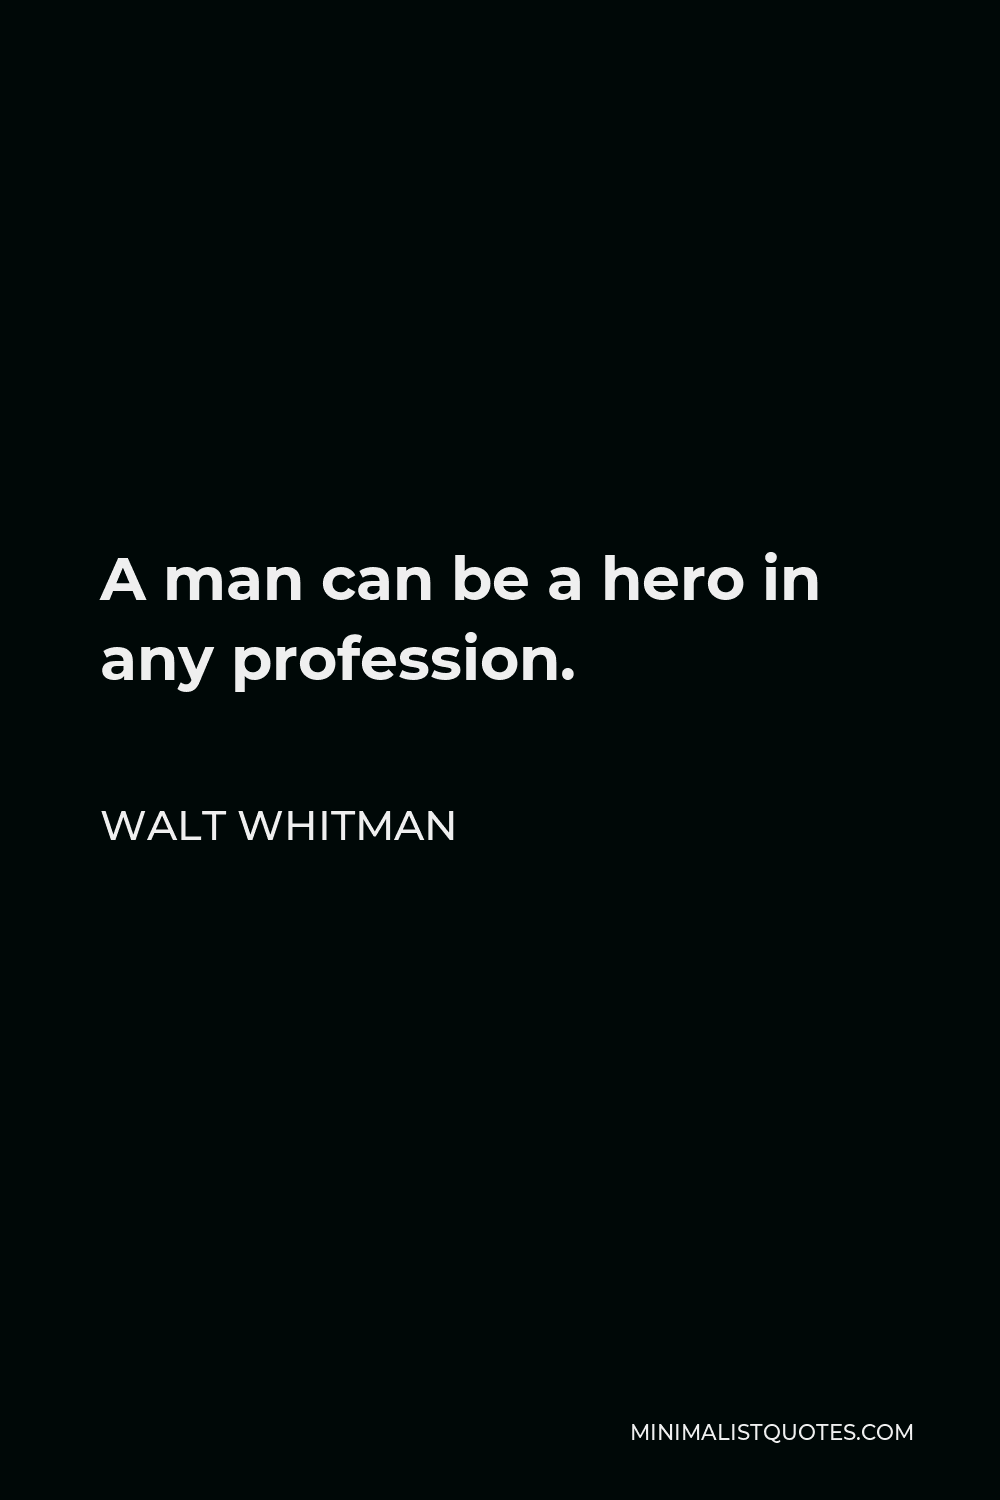 Walt Whitman Quote - A man can be a hero in any profession.